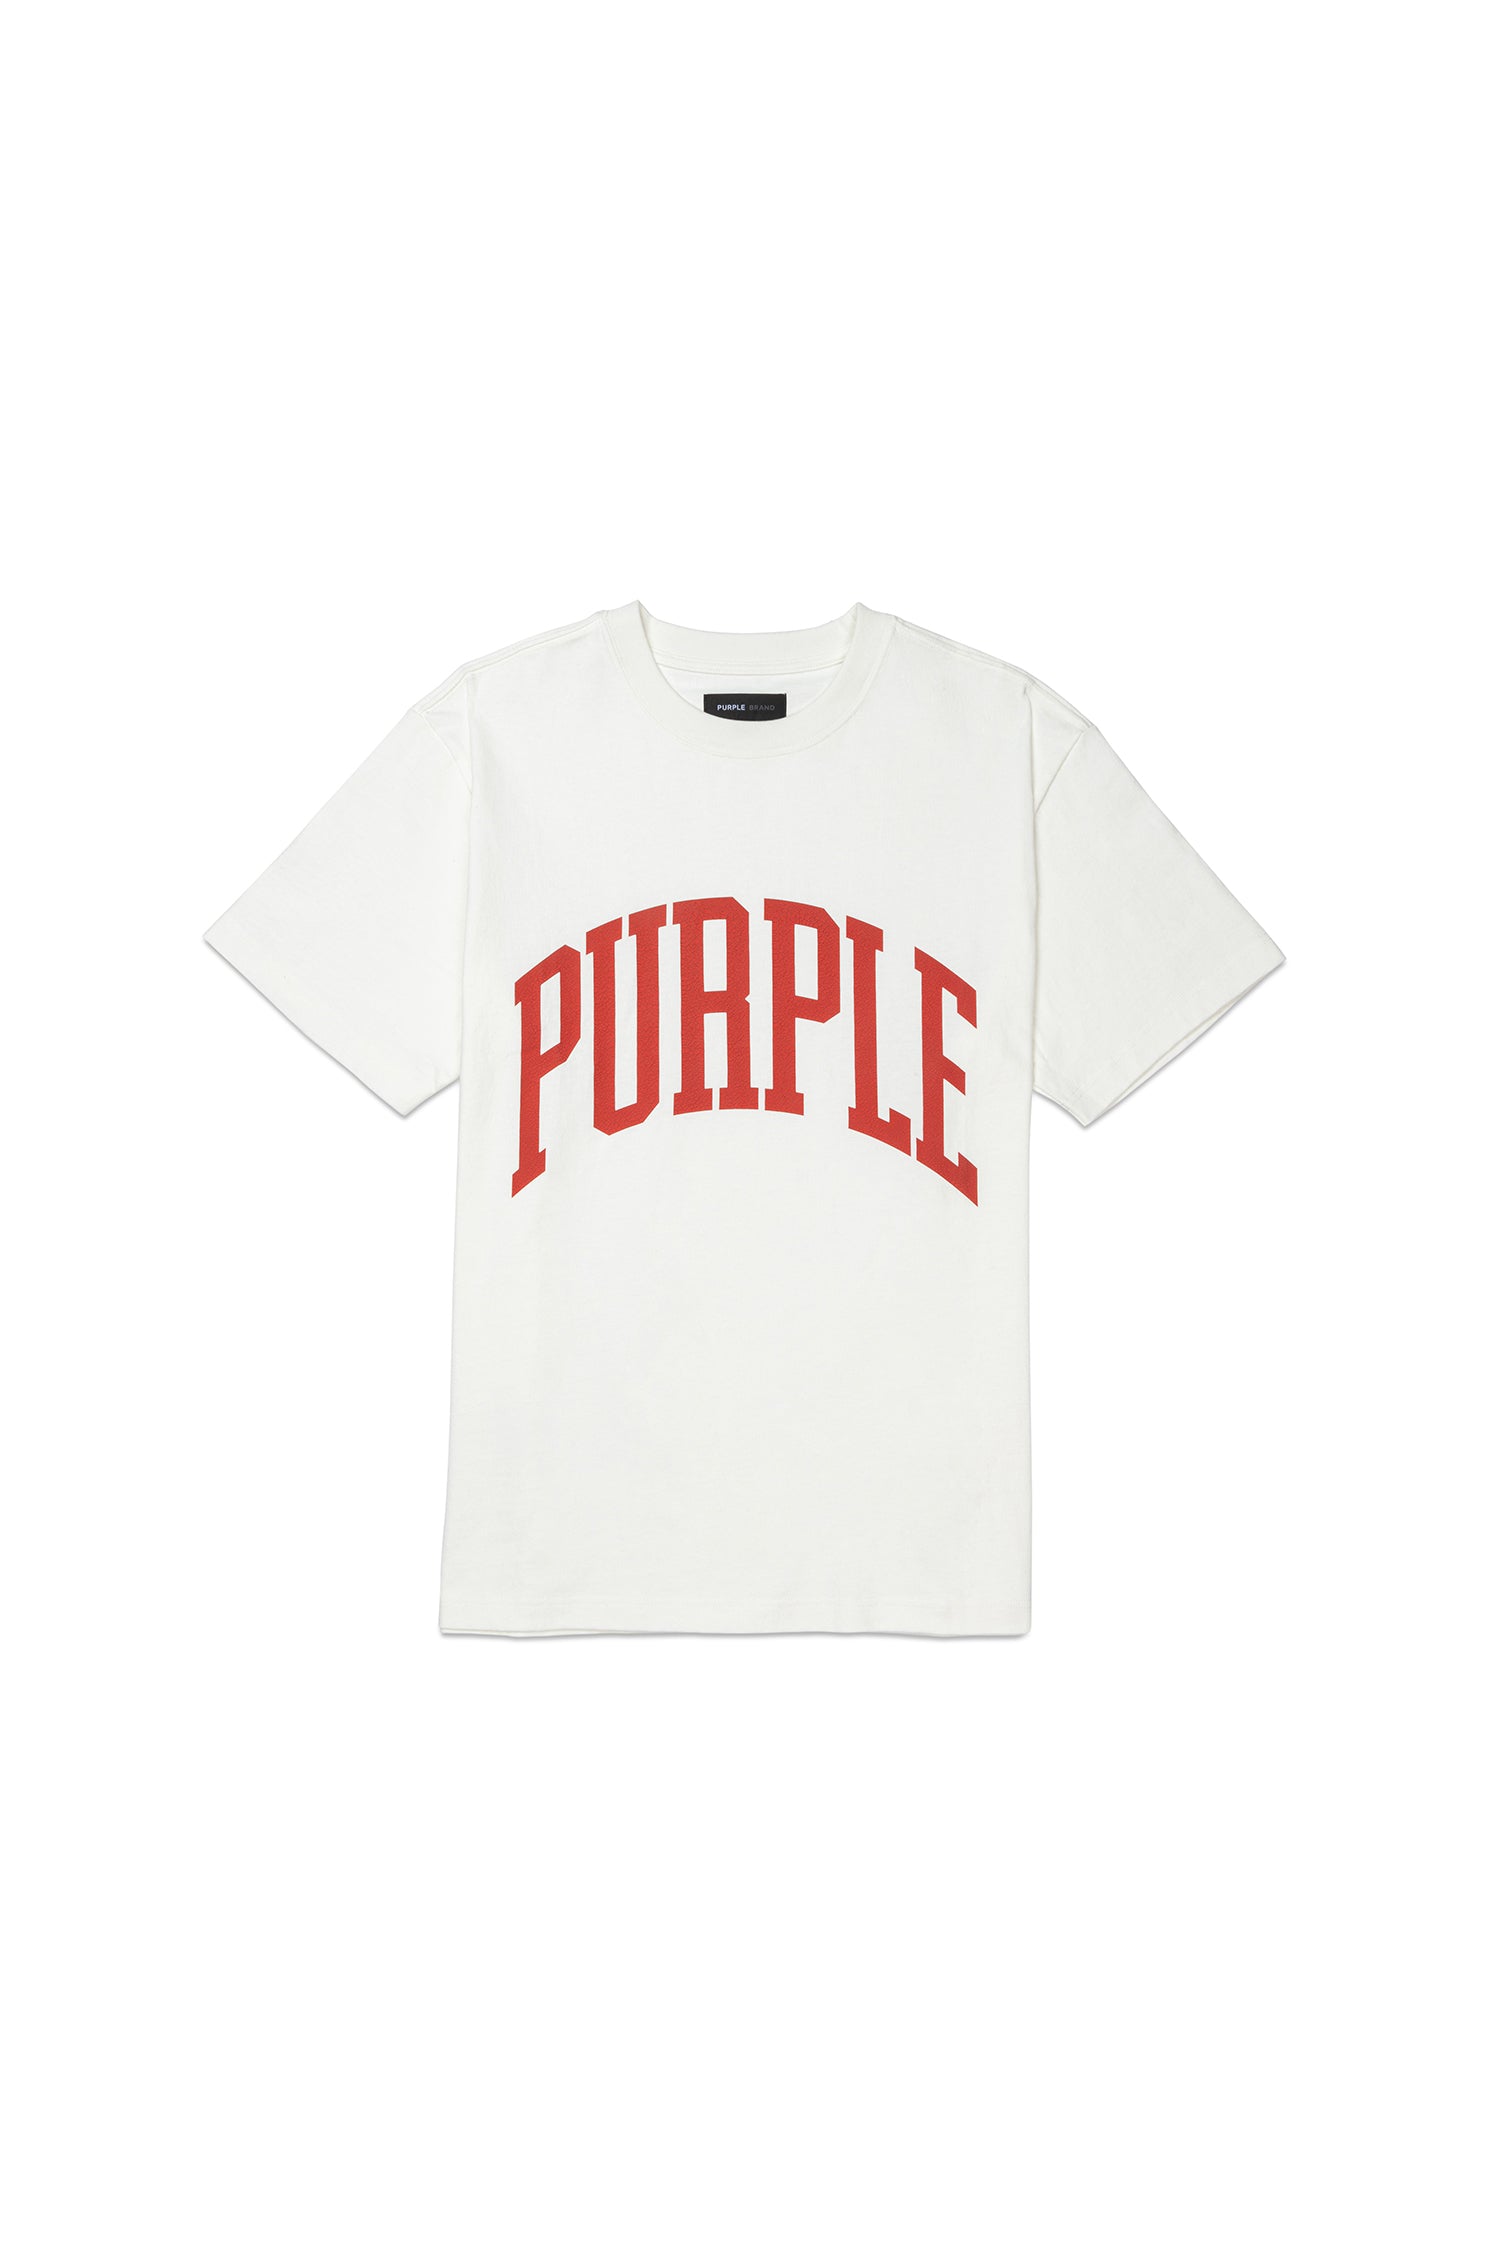 Purple Brand Textured Inside Out Tee- BLACK - Civilized Nation - Official  Site